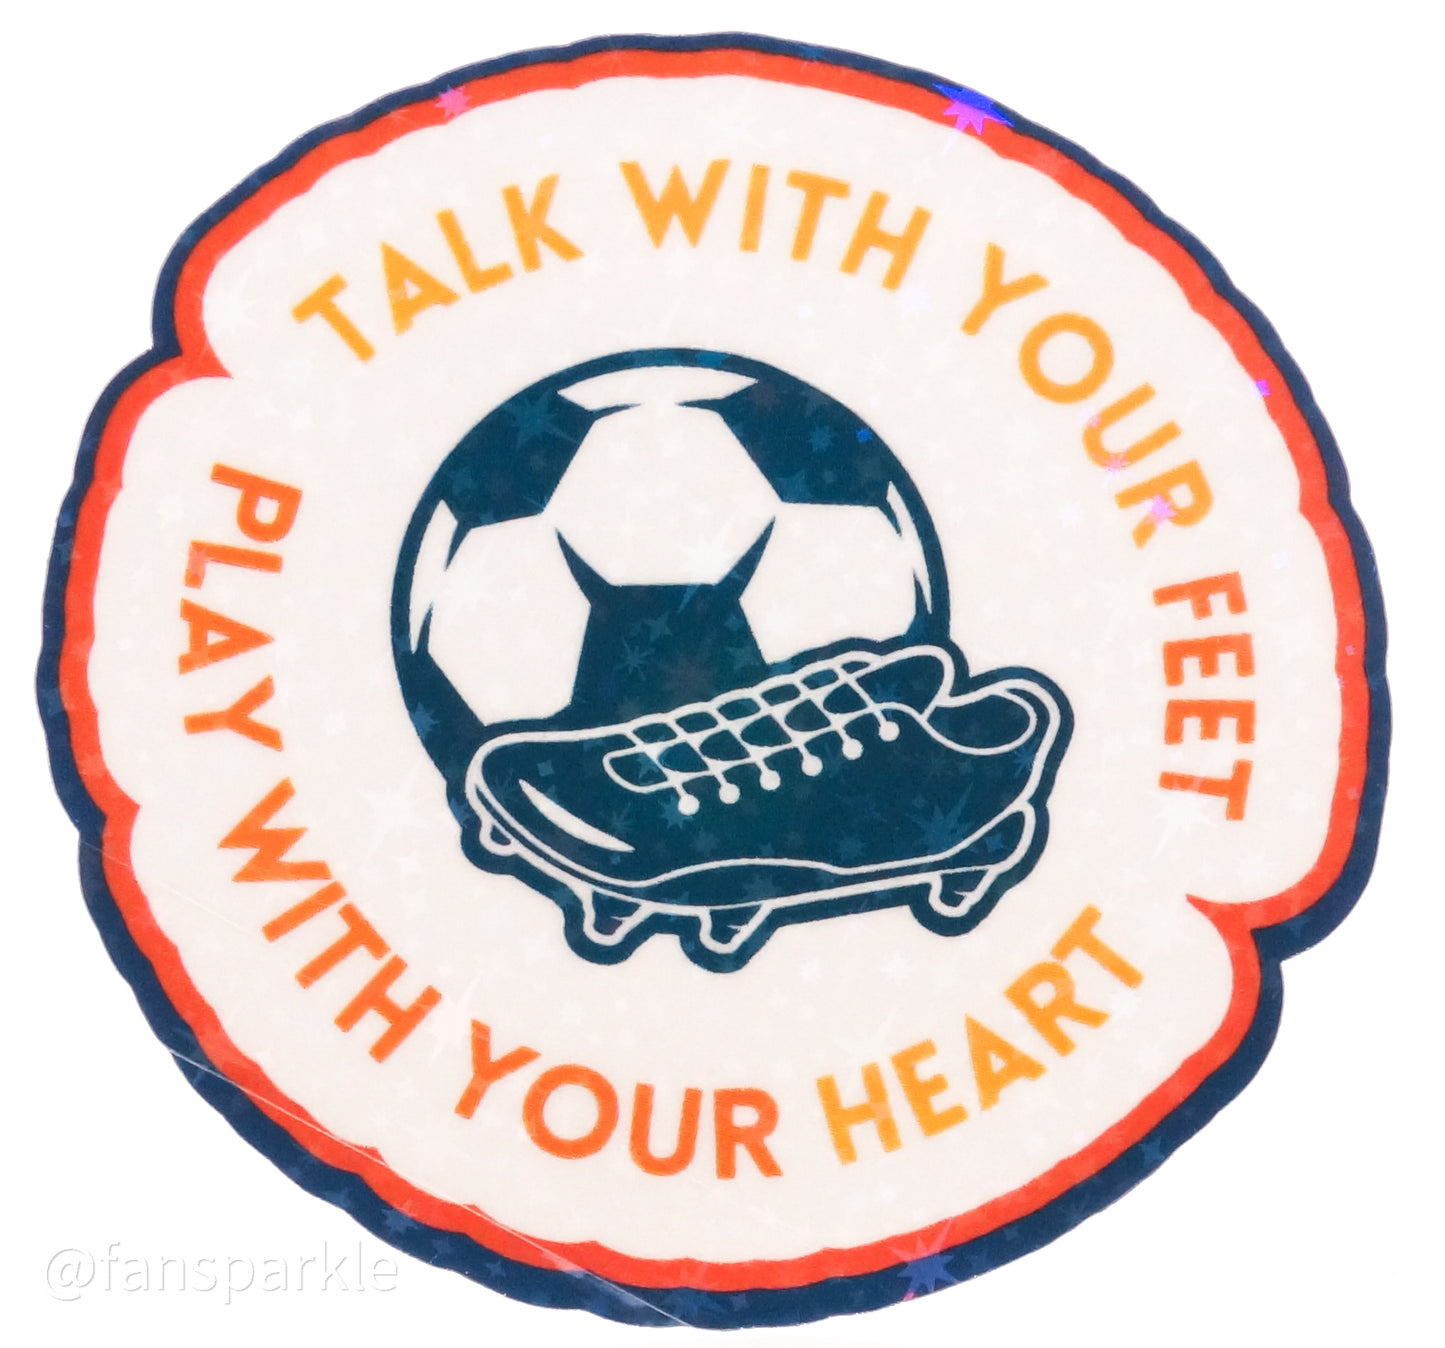 Talk with Your Feet, Play with your Heart Sticker - Fan Sparkle